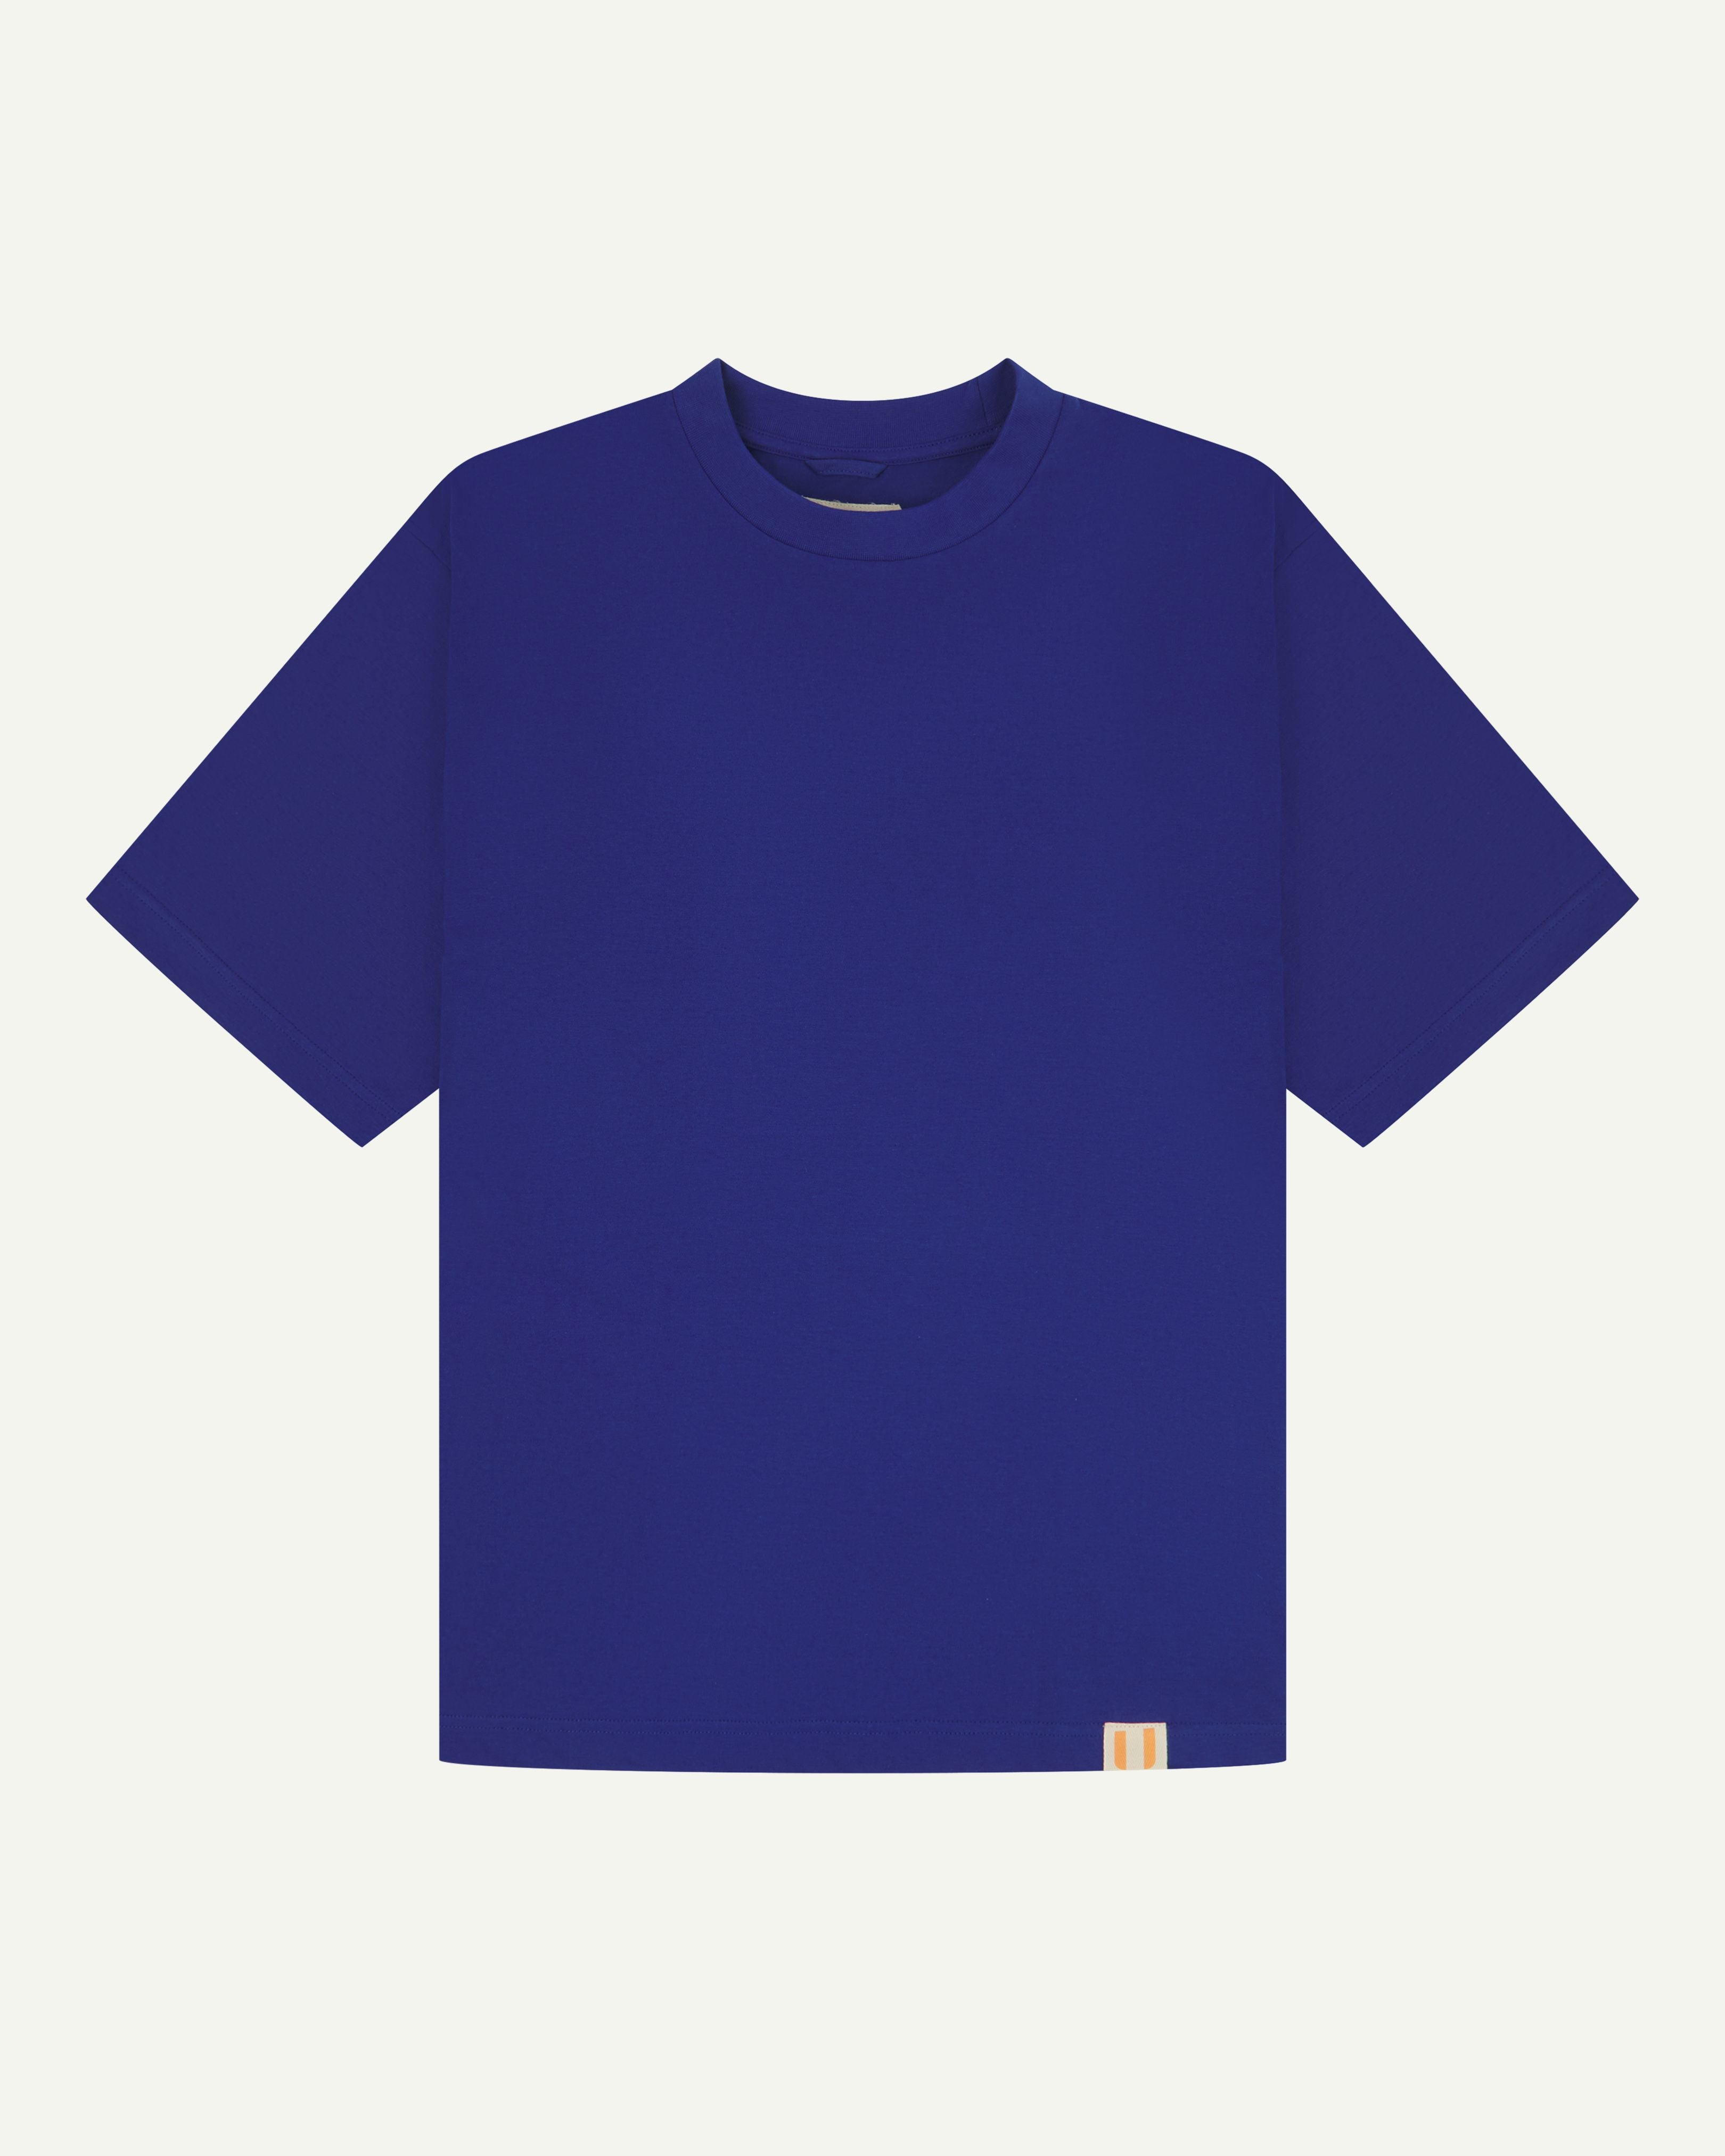 Front flat view of striking ultra blue organic cotton #7008 oversized jersey T-shirt by Uskees against white background.